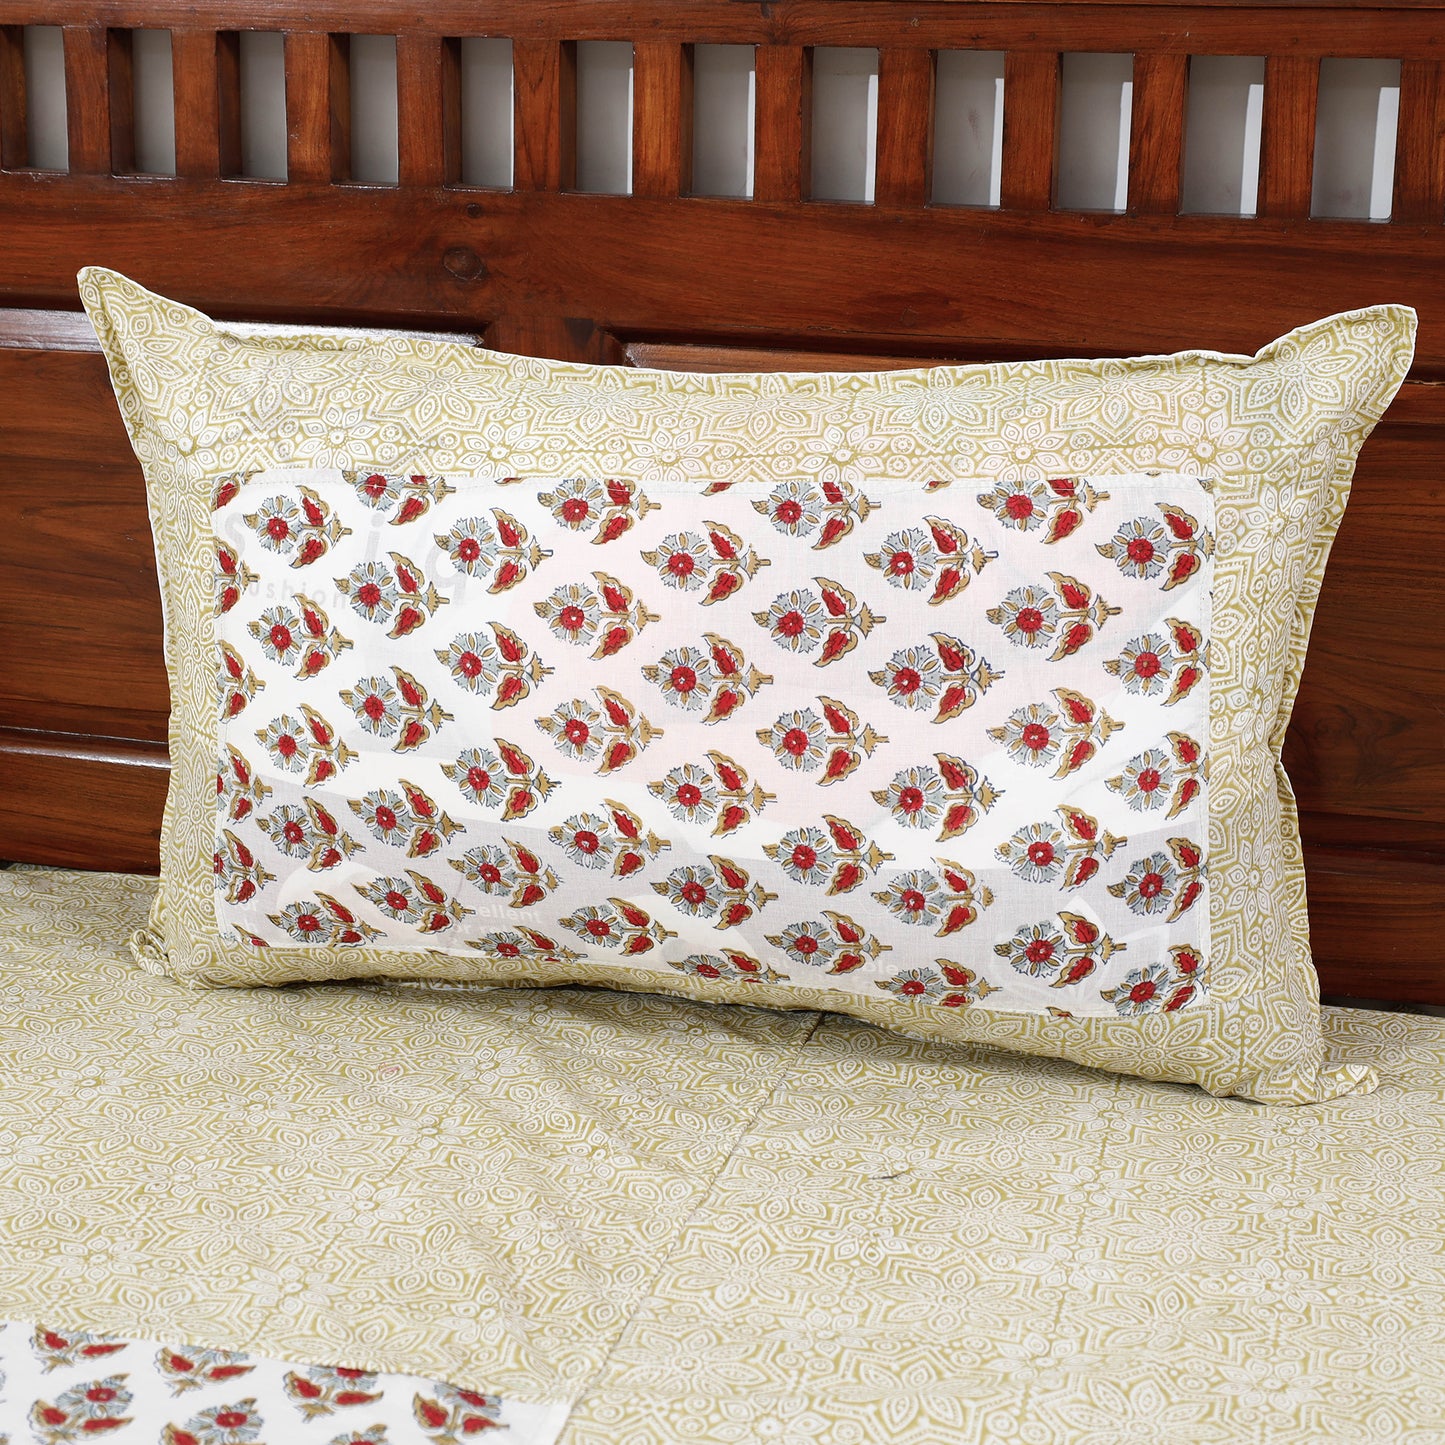 Beige - Sanganeri Block Printed Patchwork Cotton Bed Cover With Pillow Cover  (108 x 90 in)